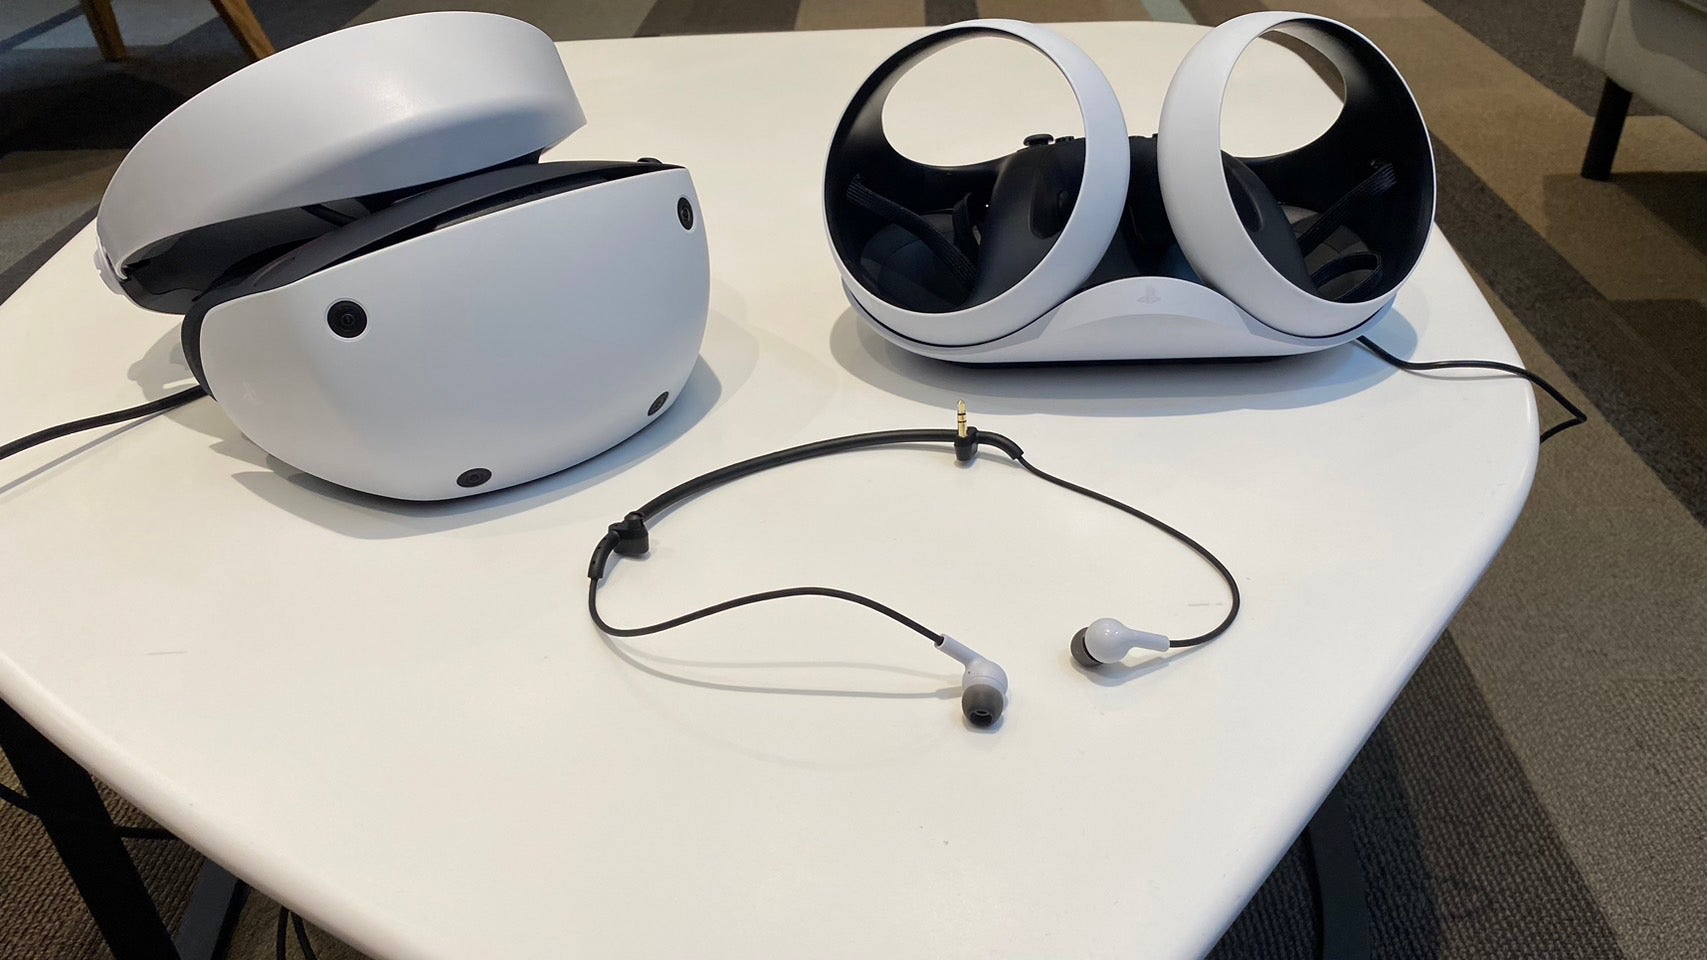 The Sony PSVR 2 pictured next to its earbuds and optional charging cradle (Photo: Michelle Ehrhardt / Gizmodo)